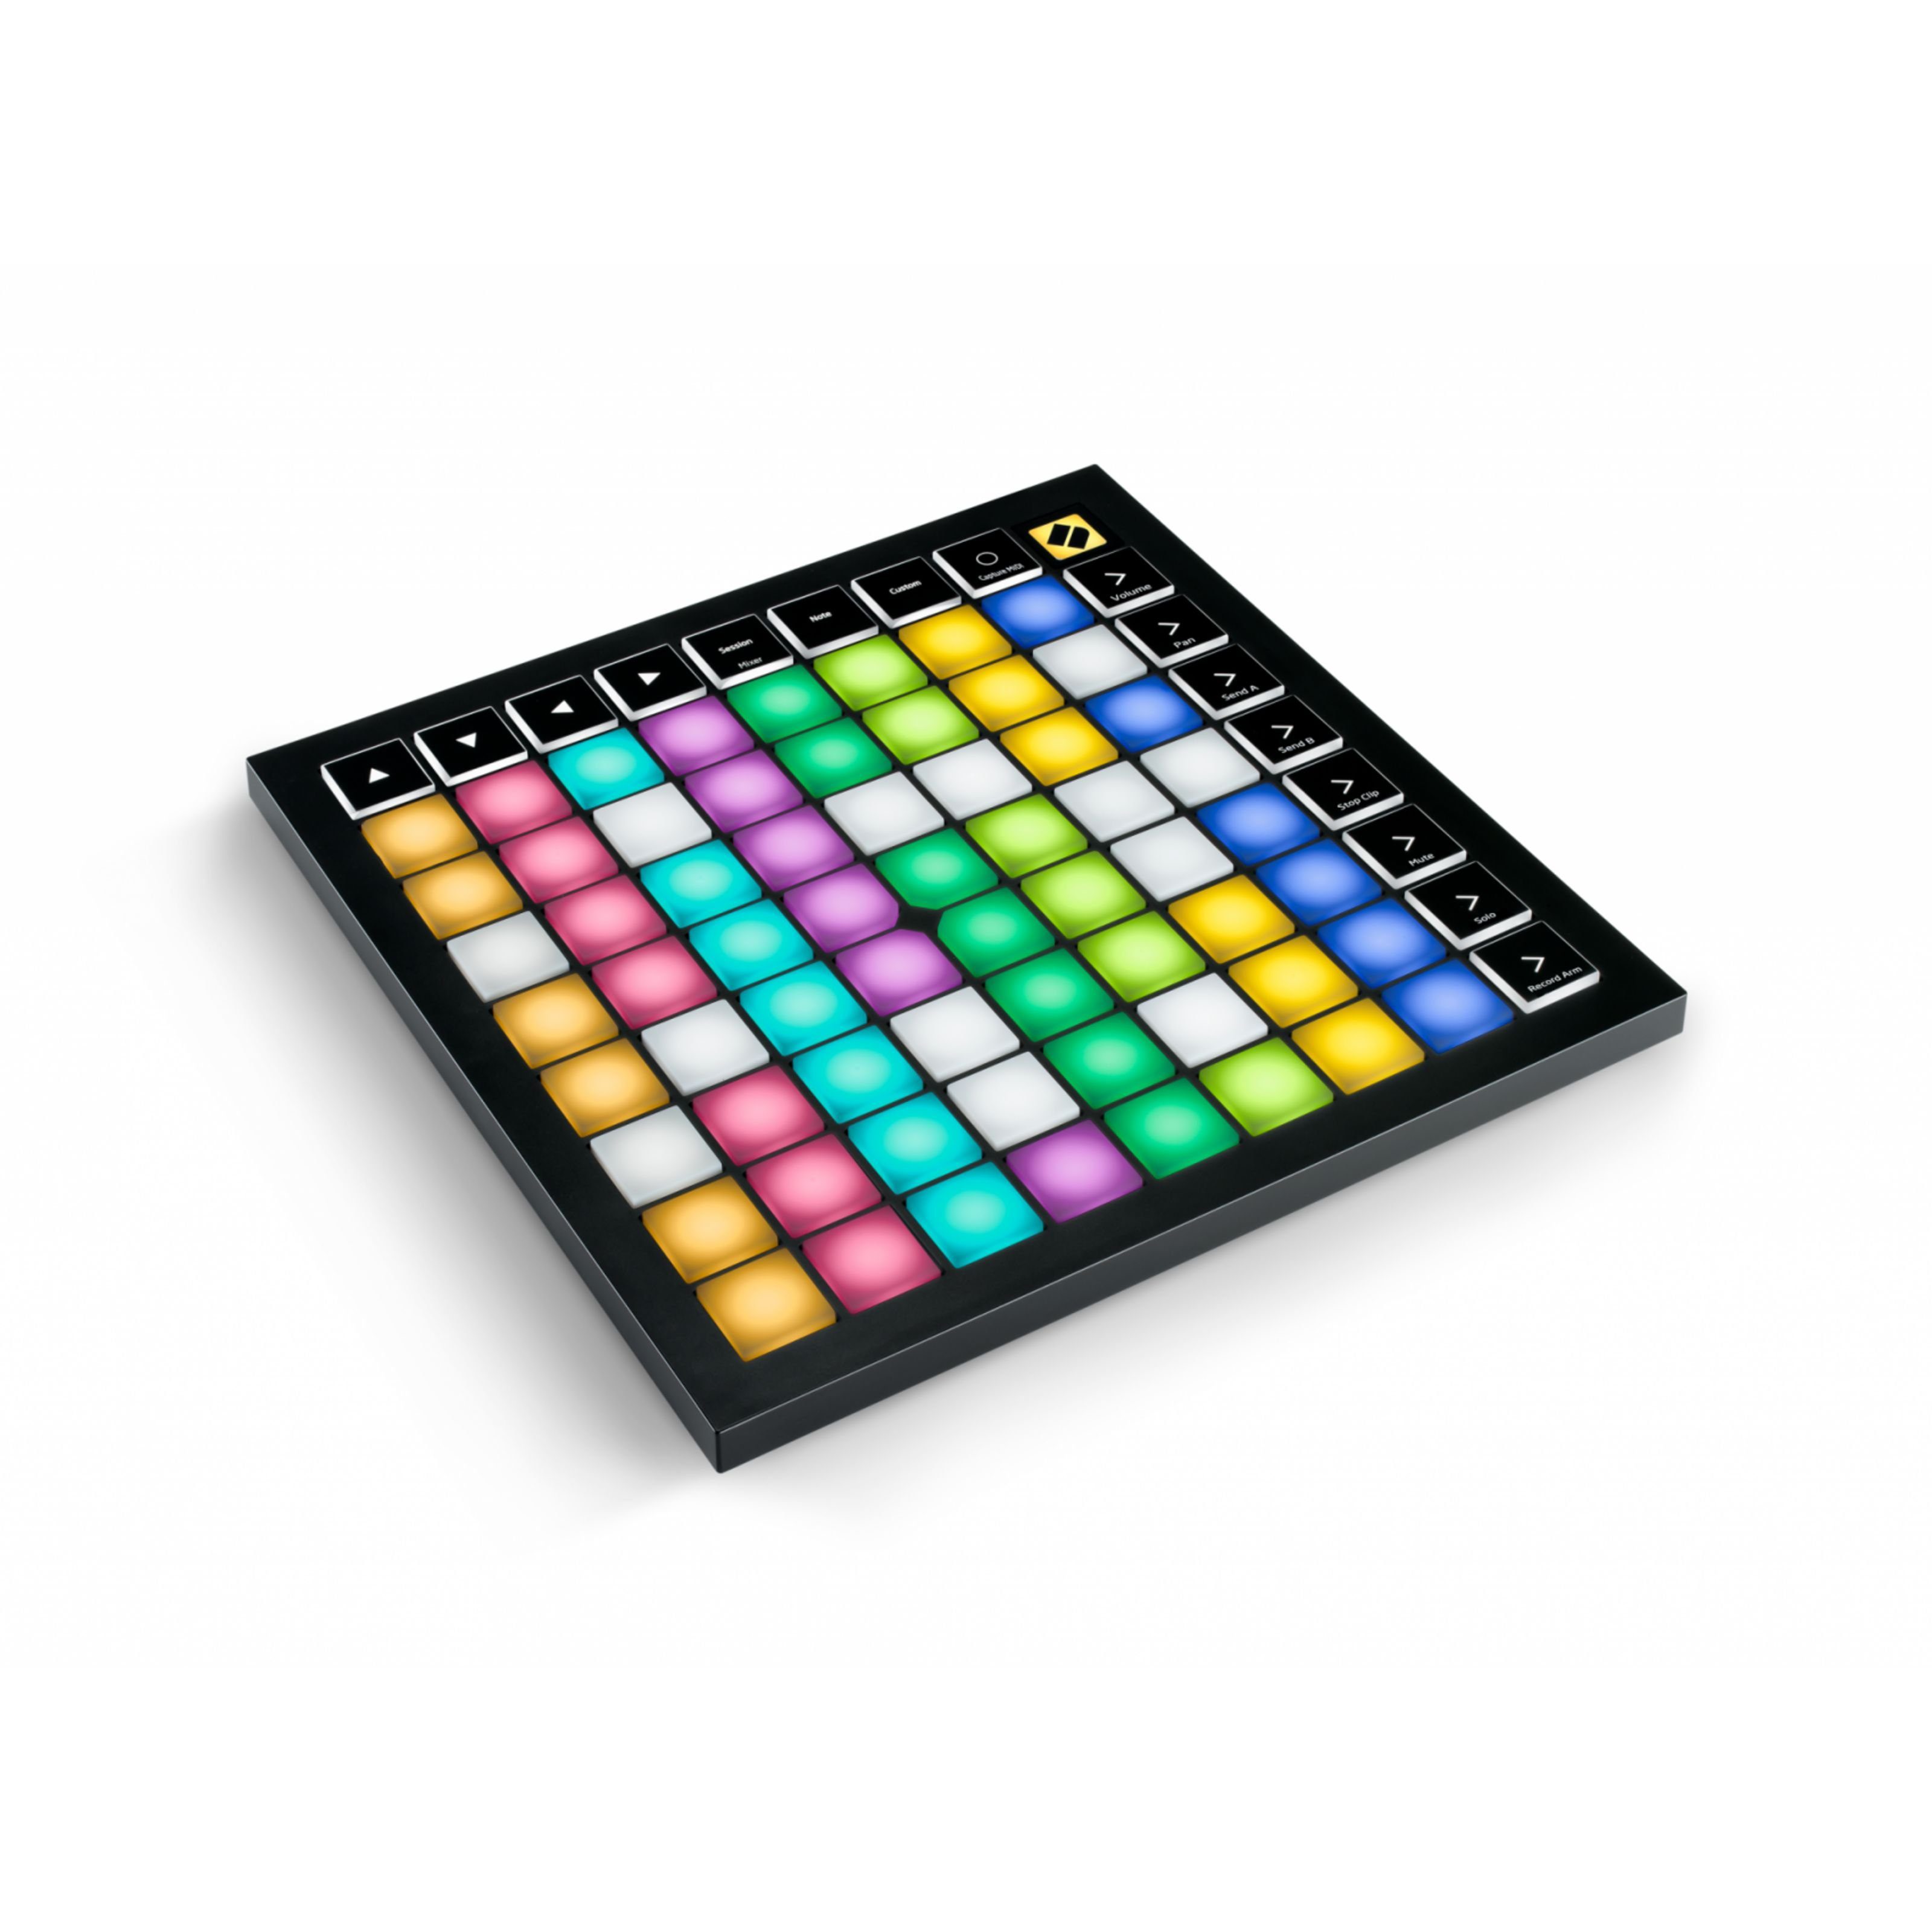 Novation Mischpult, (Launchpad X Grid-Instrument f. AbletonLive, Hardware Controller, DAW Controller), Launchpad X - DAW Controller